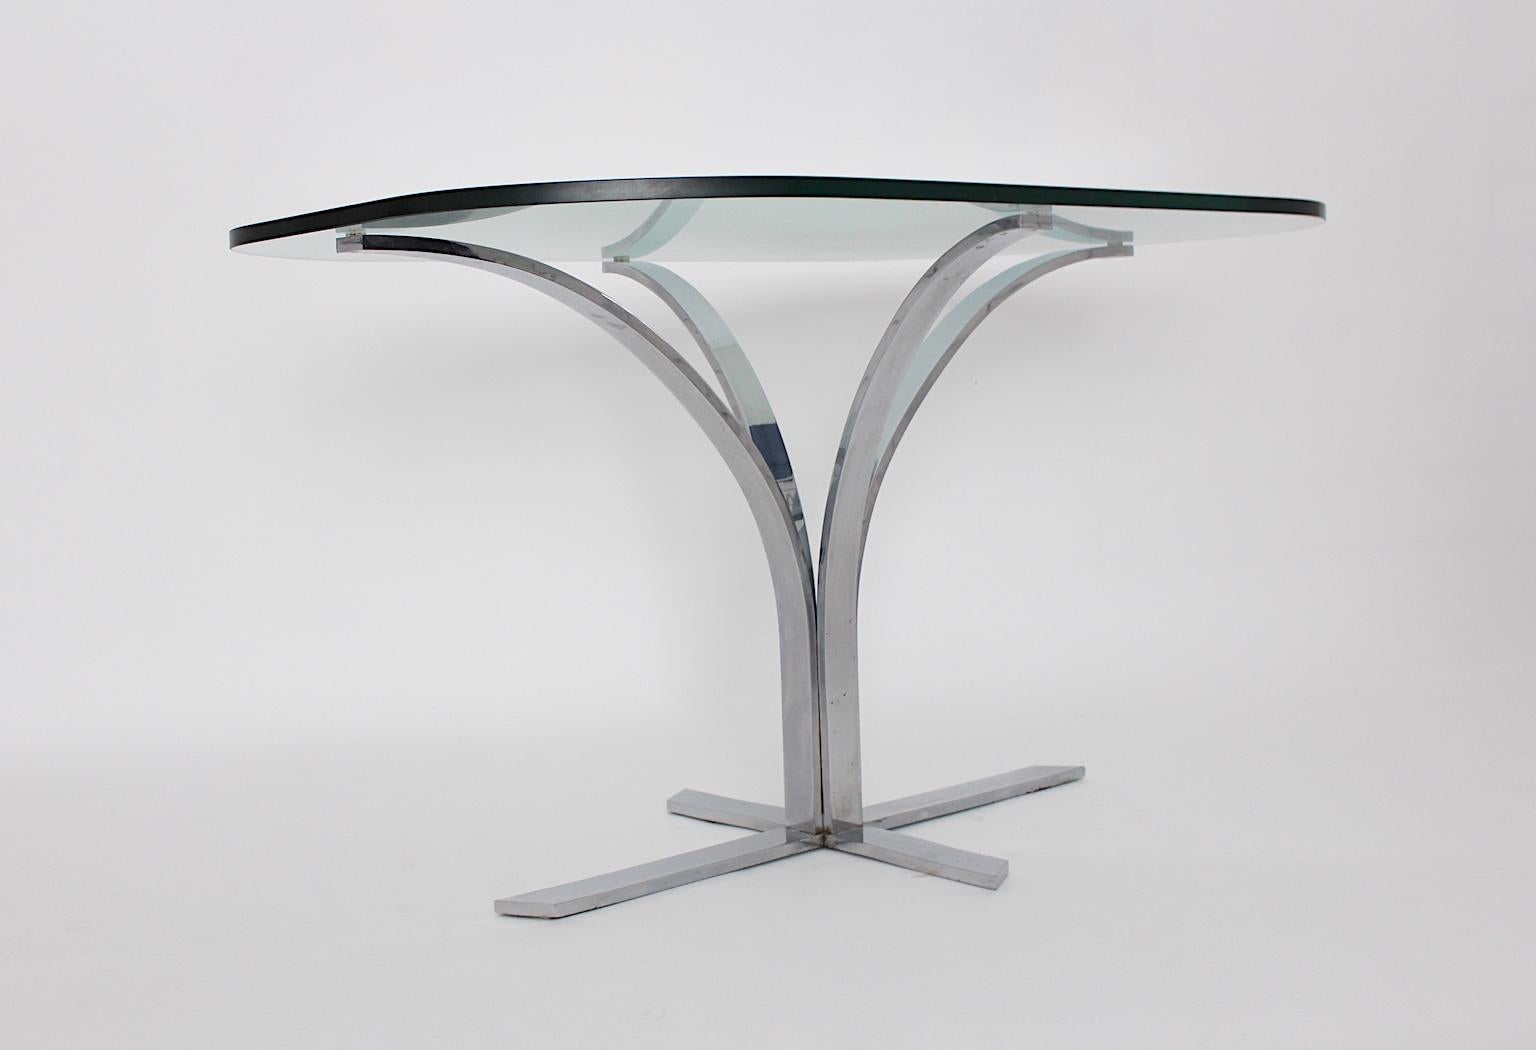 Space Age Chromed Metal Vintage Dining Table or Writing Table, 1960s, Germany For Sale 4